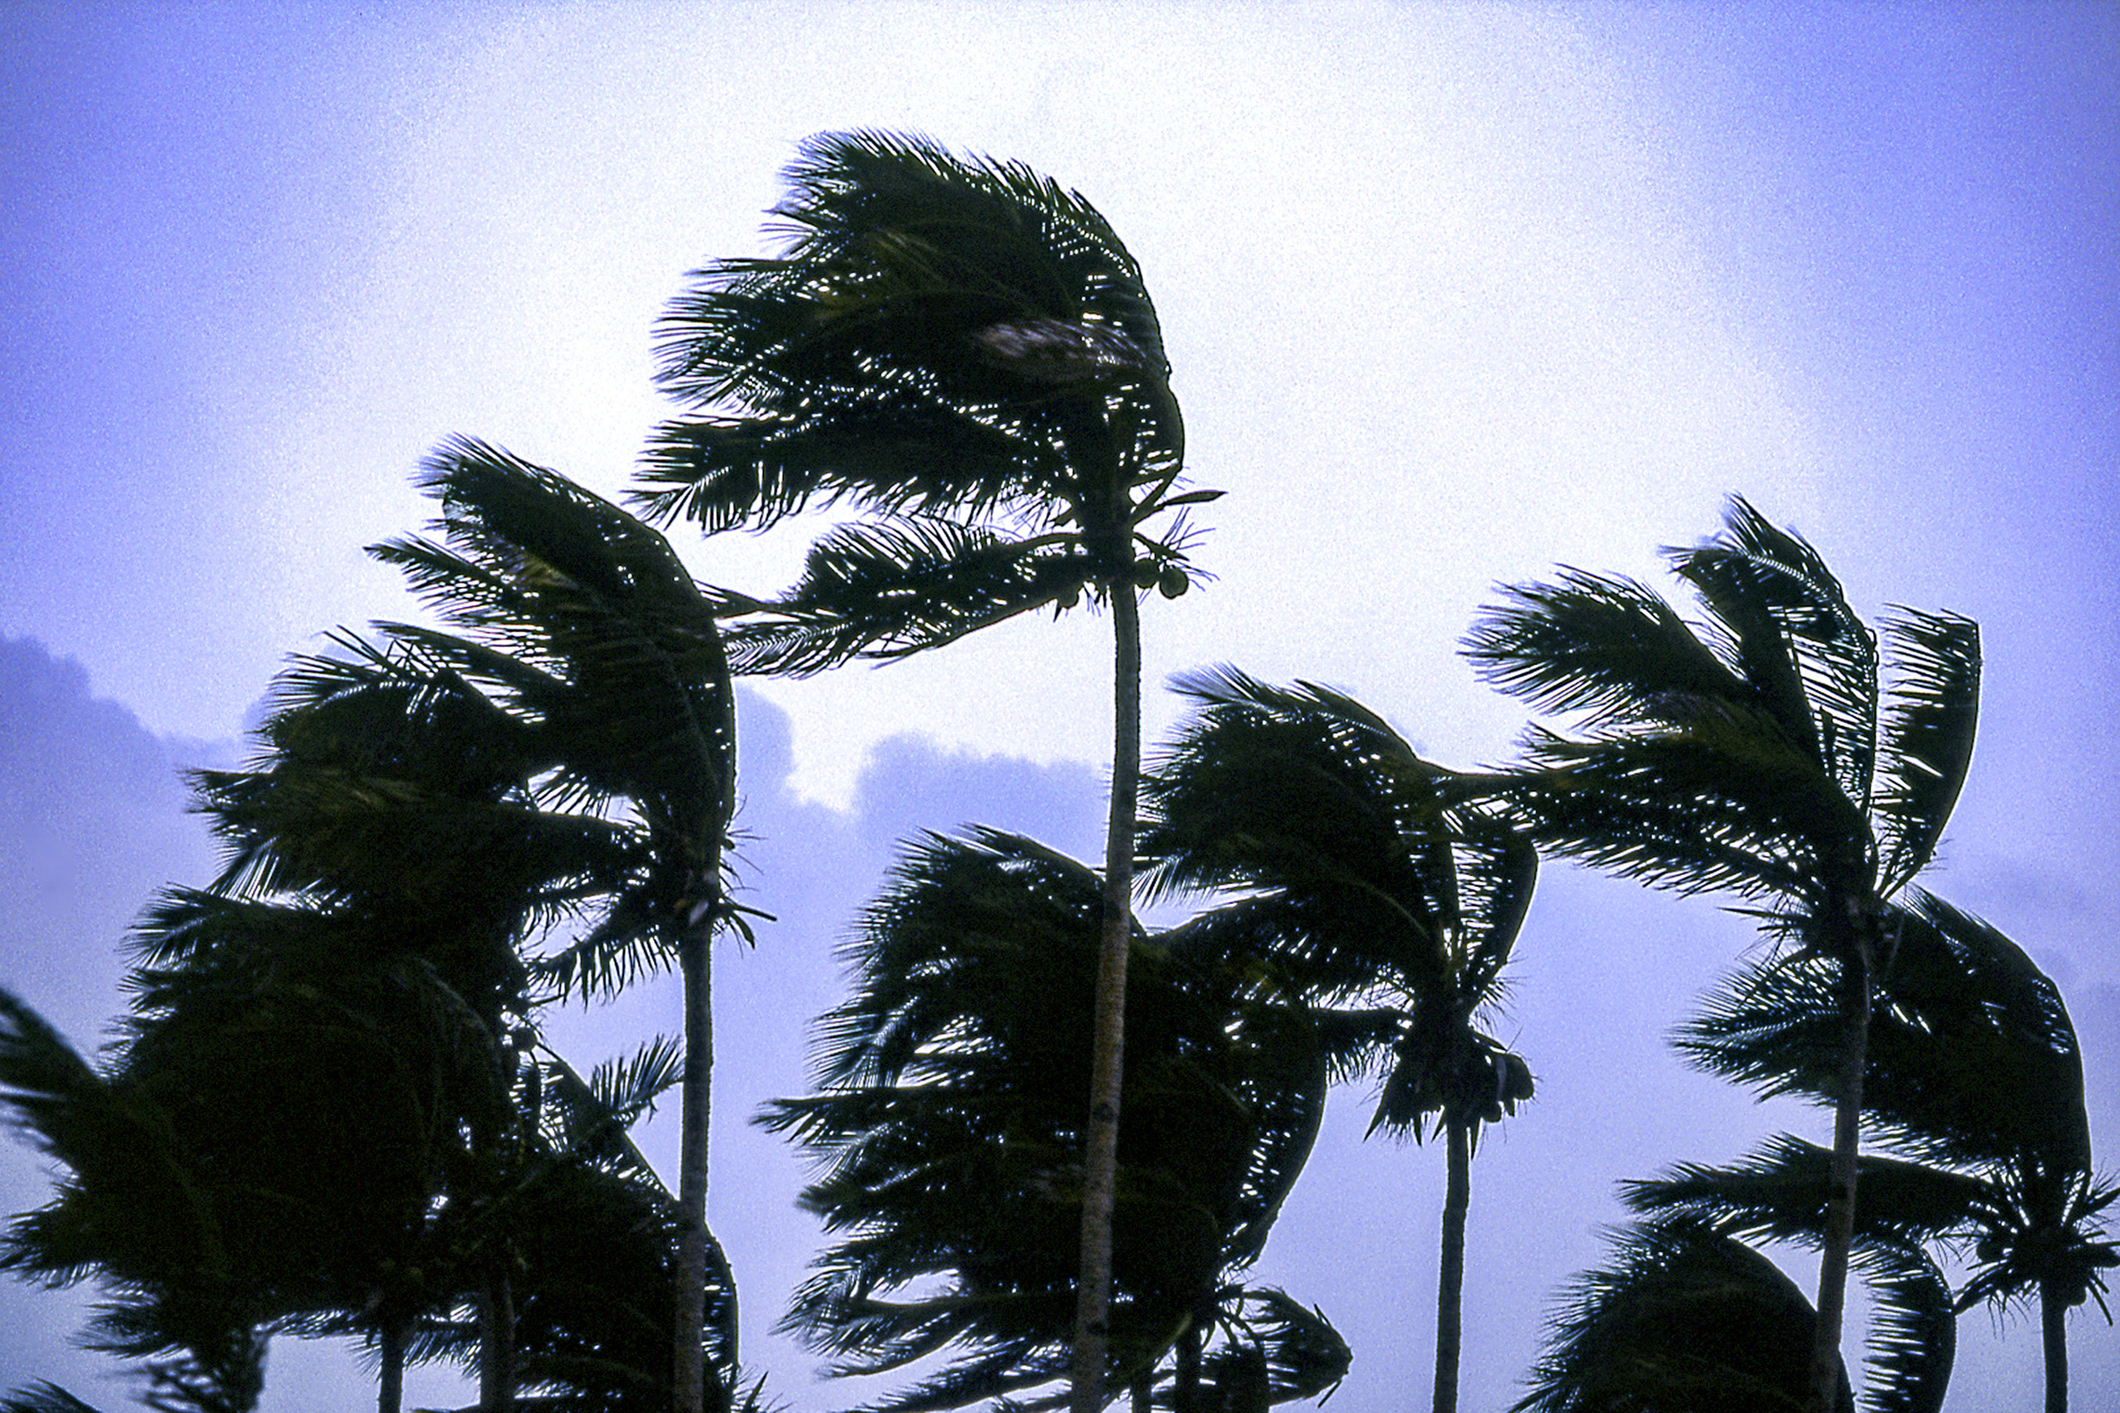 A photo of palm trees bending in category 1 typhoon winds on Boracay Island in the Philippines